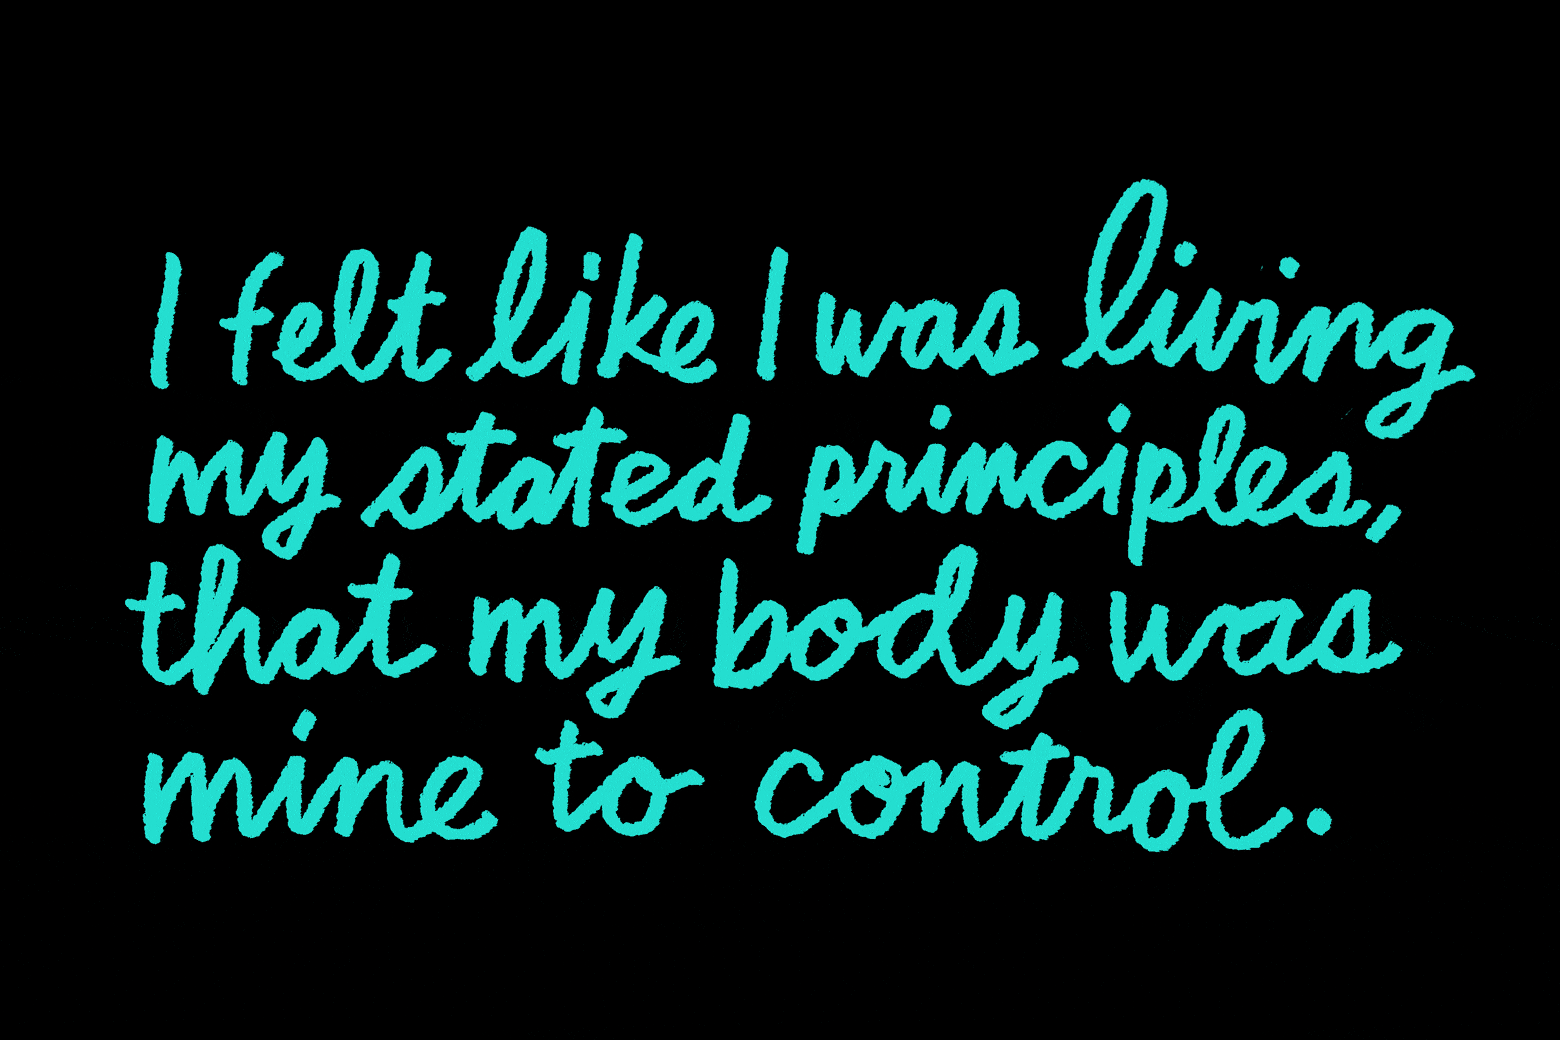 "I felt like I was living my stated principles, that my body was mine to control." - Anna Holmes